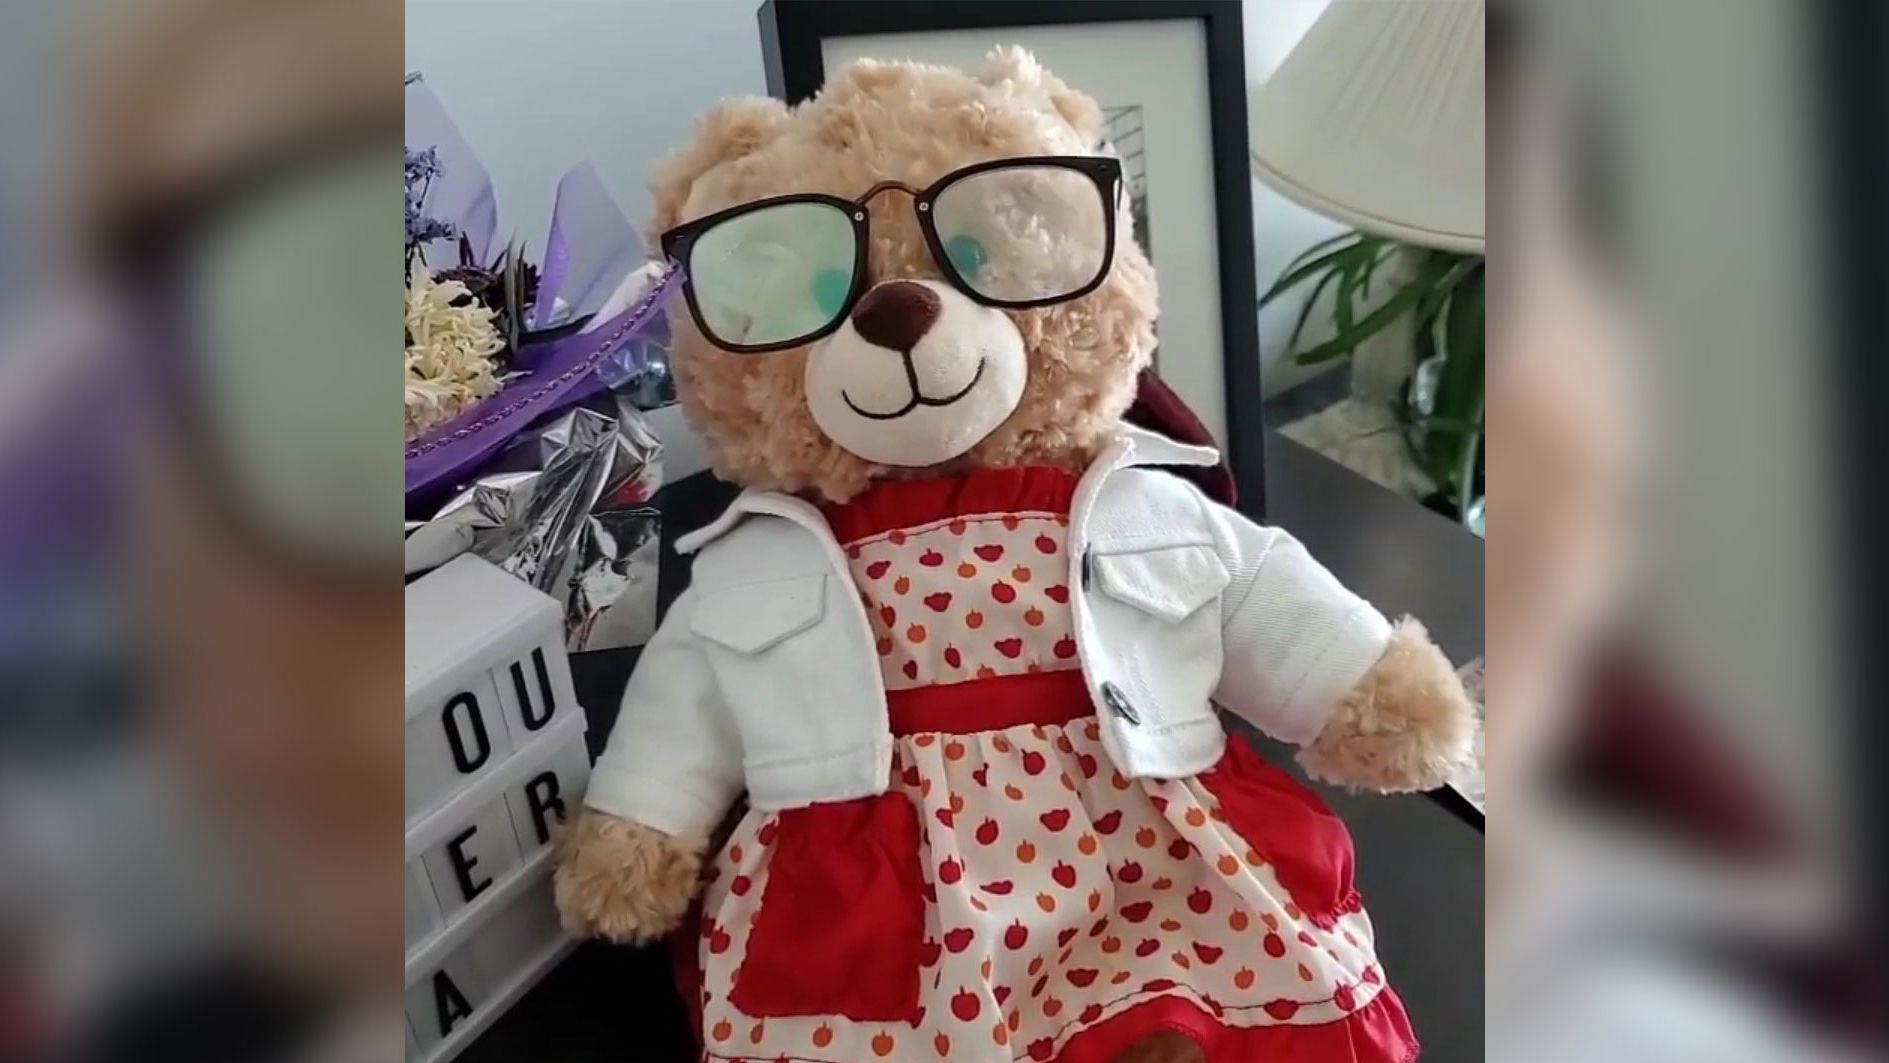 Before Marilyn Soriano passed away last year, she gave this bear to her daughter, Mara Soriano. It includes a voice memo.